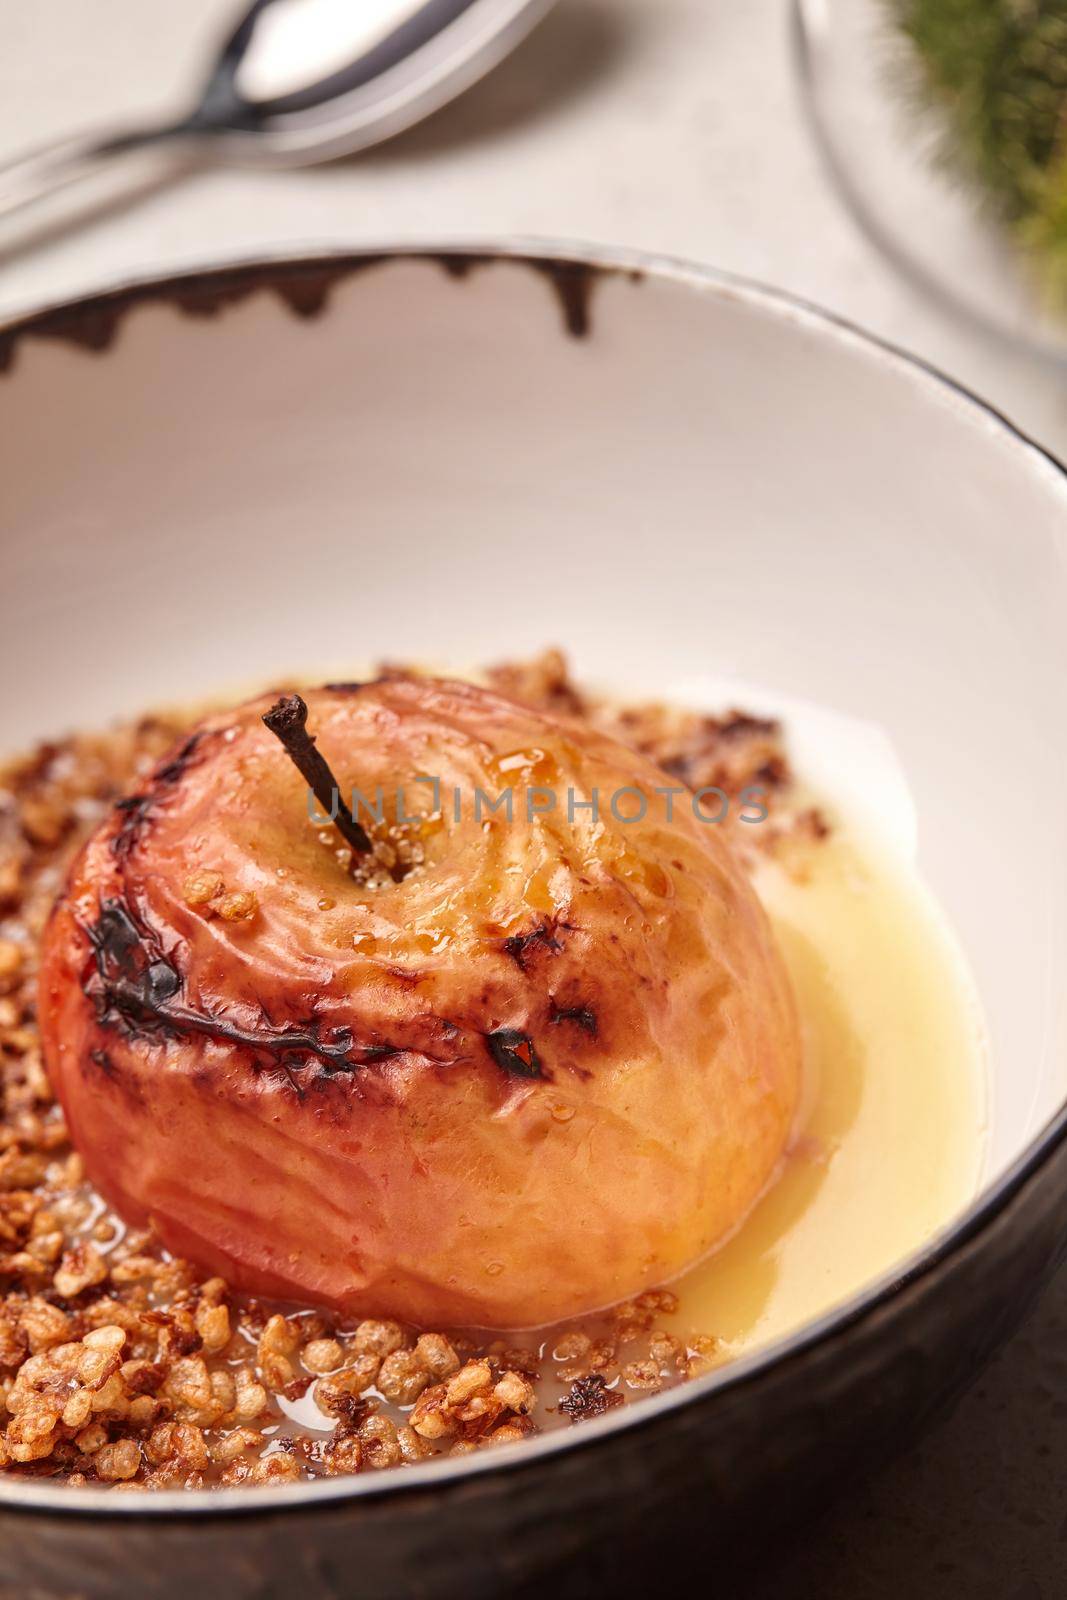 Close-up photo of a gourmet baked apple stuffed with honey and nuts, healthy nutrition, delicious sweet food, gorgeous fruit dessert flavored with cinnamon. Autumn or winter dessert. Served in a deep bowl. Cooking concept.